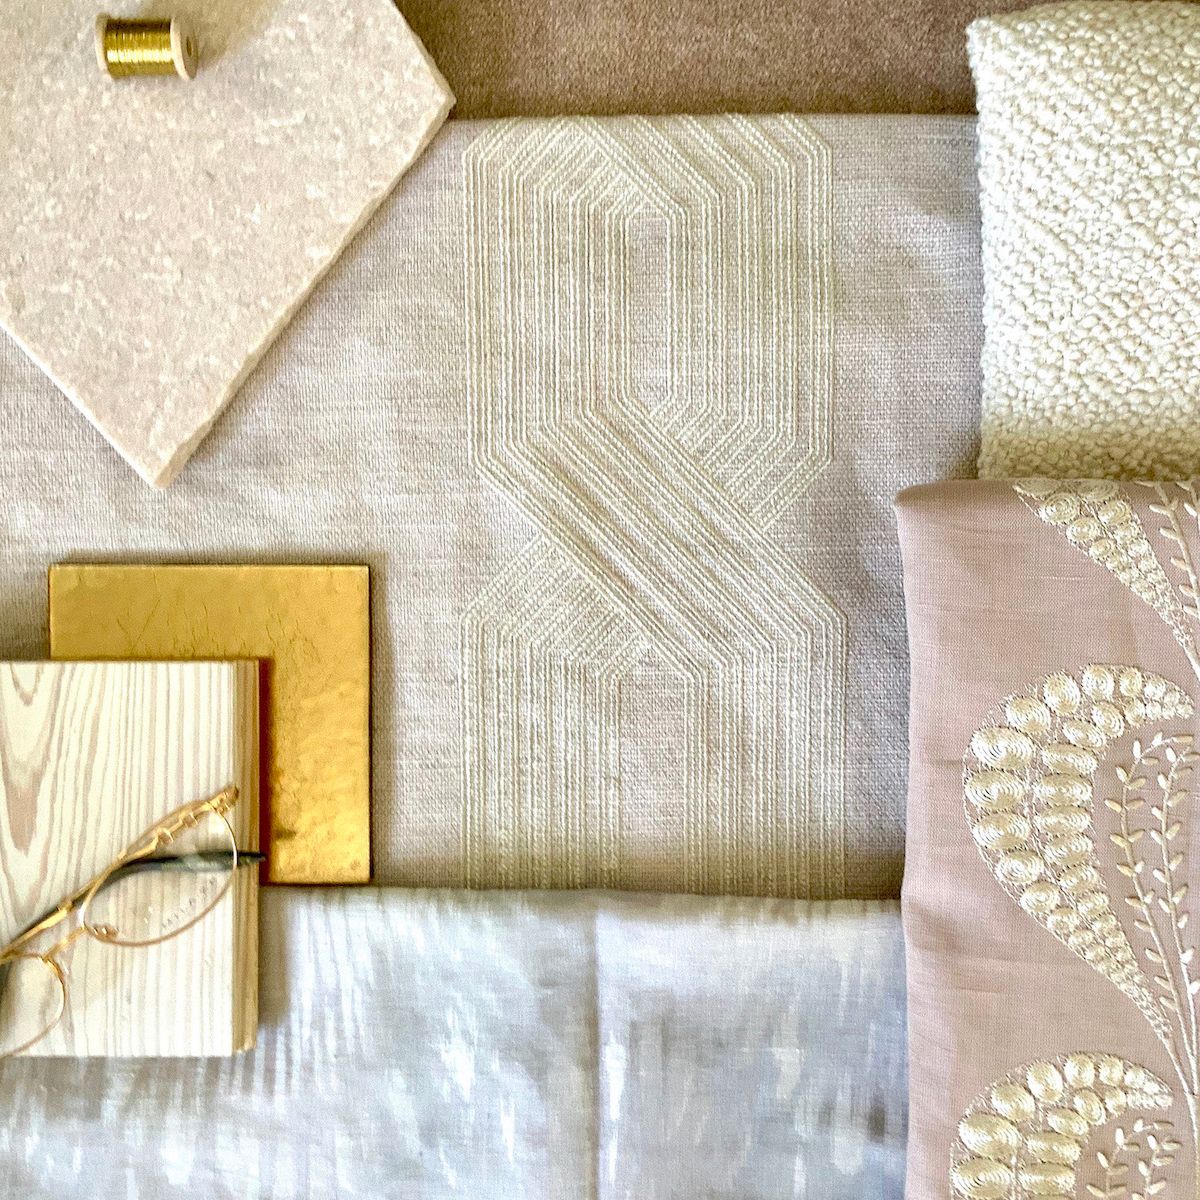 Kravet Couture Introduces Naila With Windsor Smith - News from Laguna Design Center